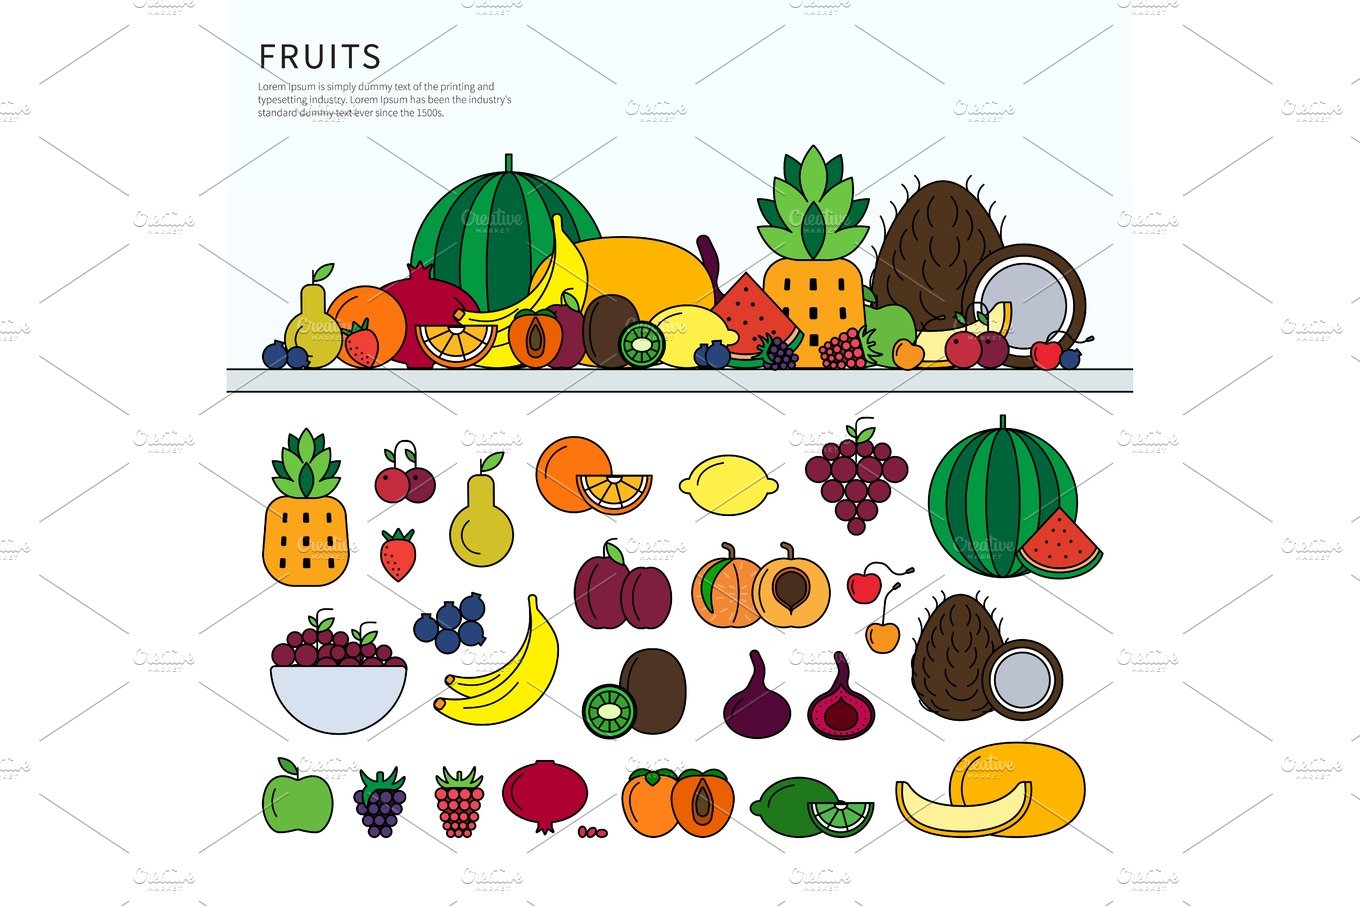 Many fruits on the table cover image.